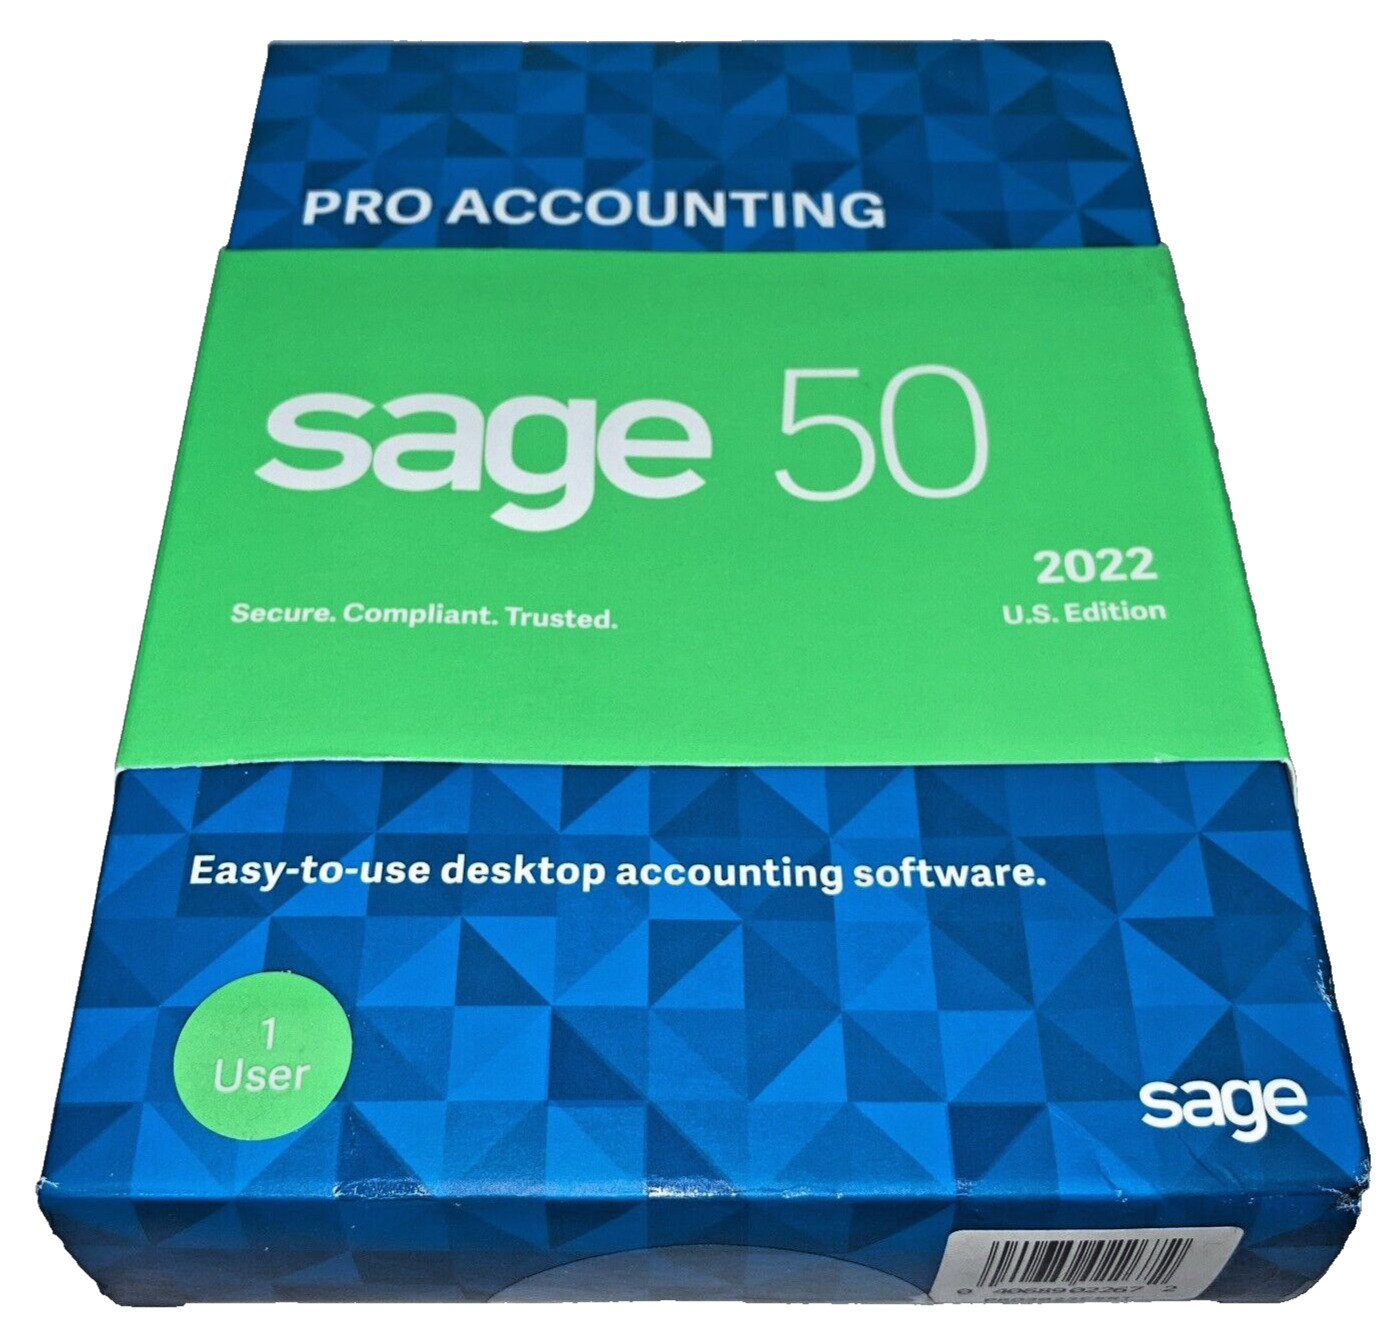 sage 50 Pro Accounting 2022 US edition software  Windows  8.1, 10- 1 User